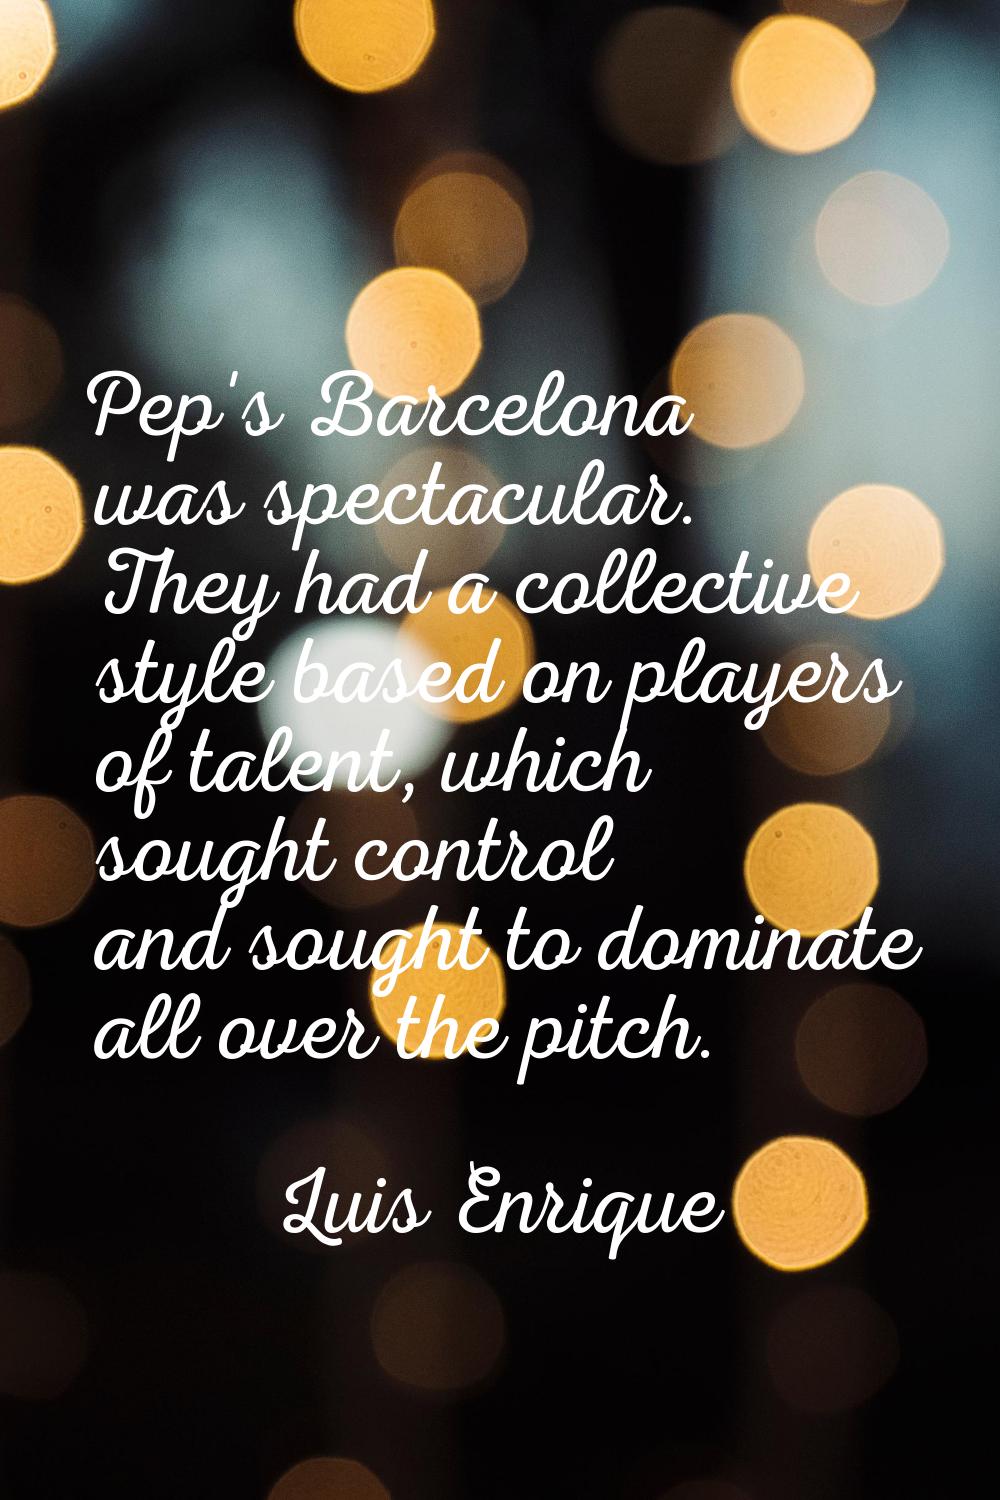 Pep's Barcelona was spectacular. They had a collective style based on players of talent, which soug